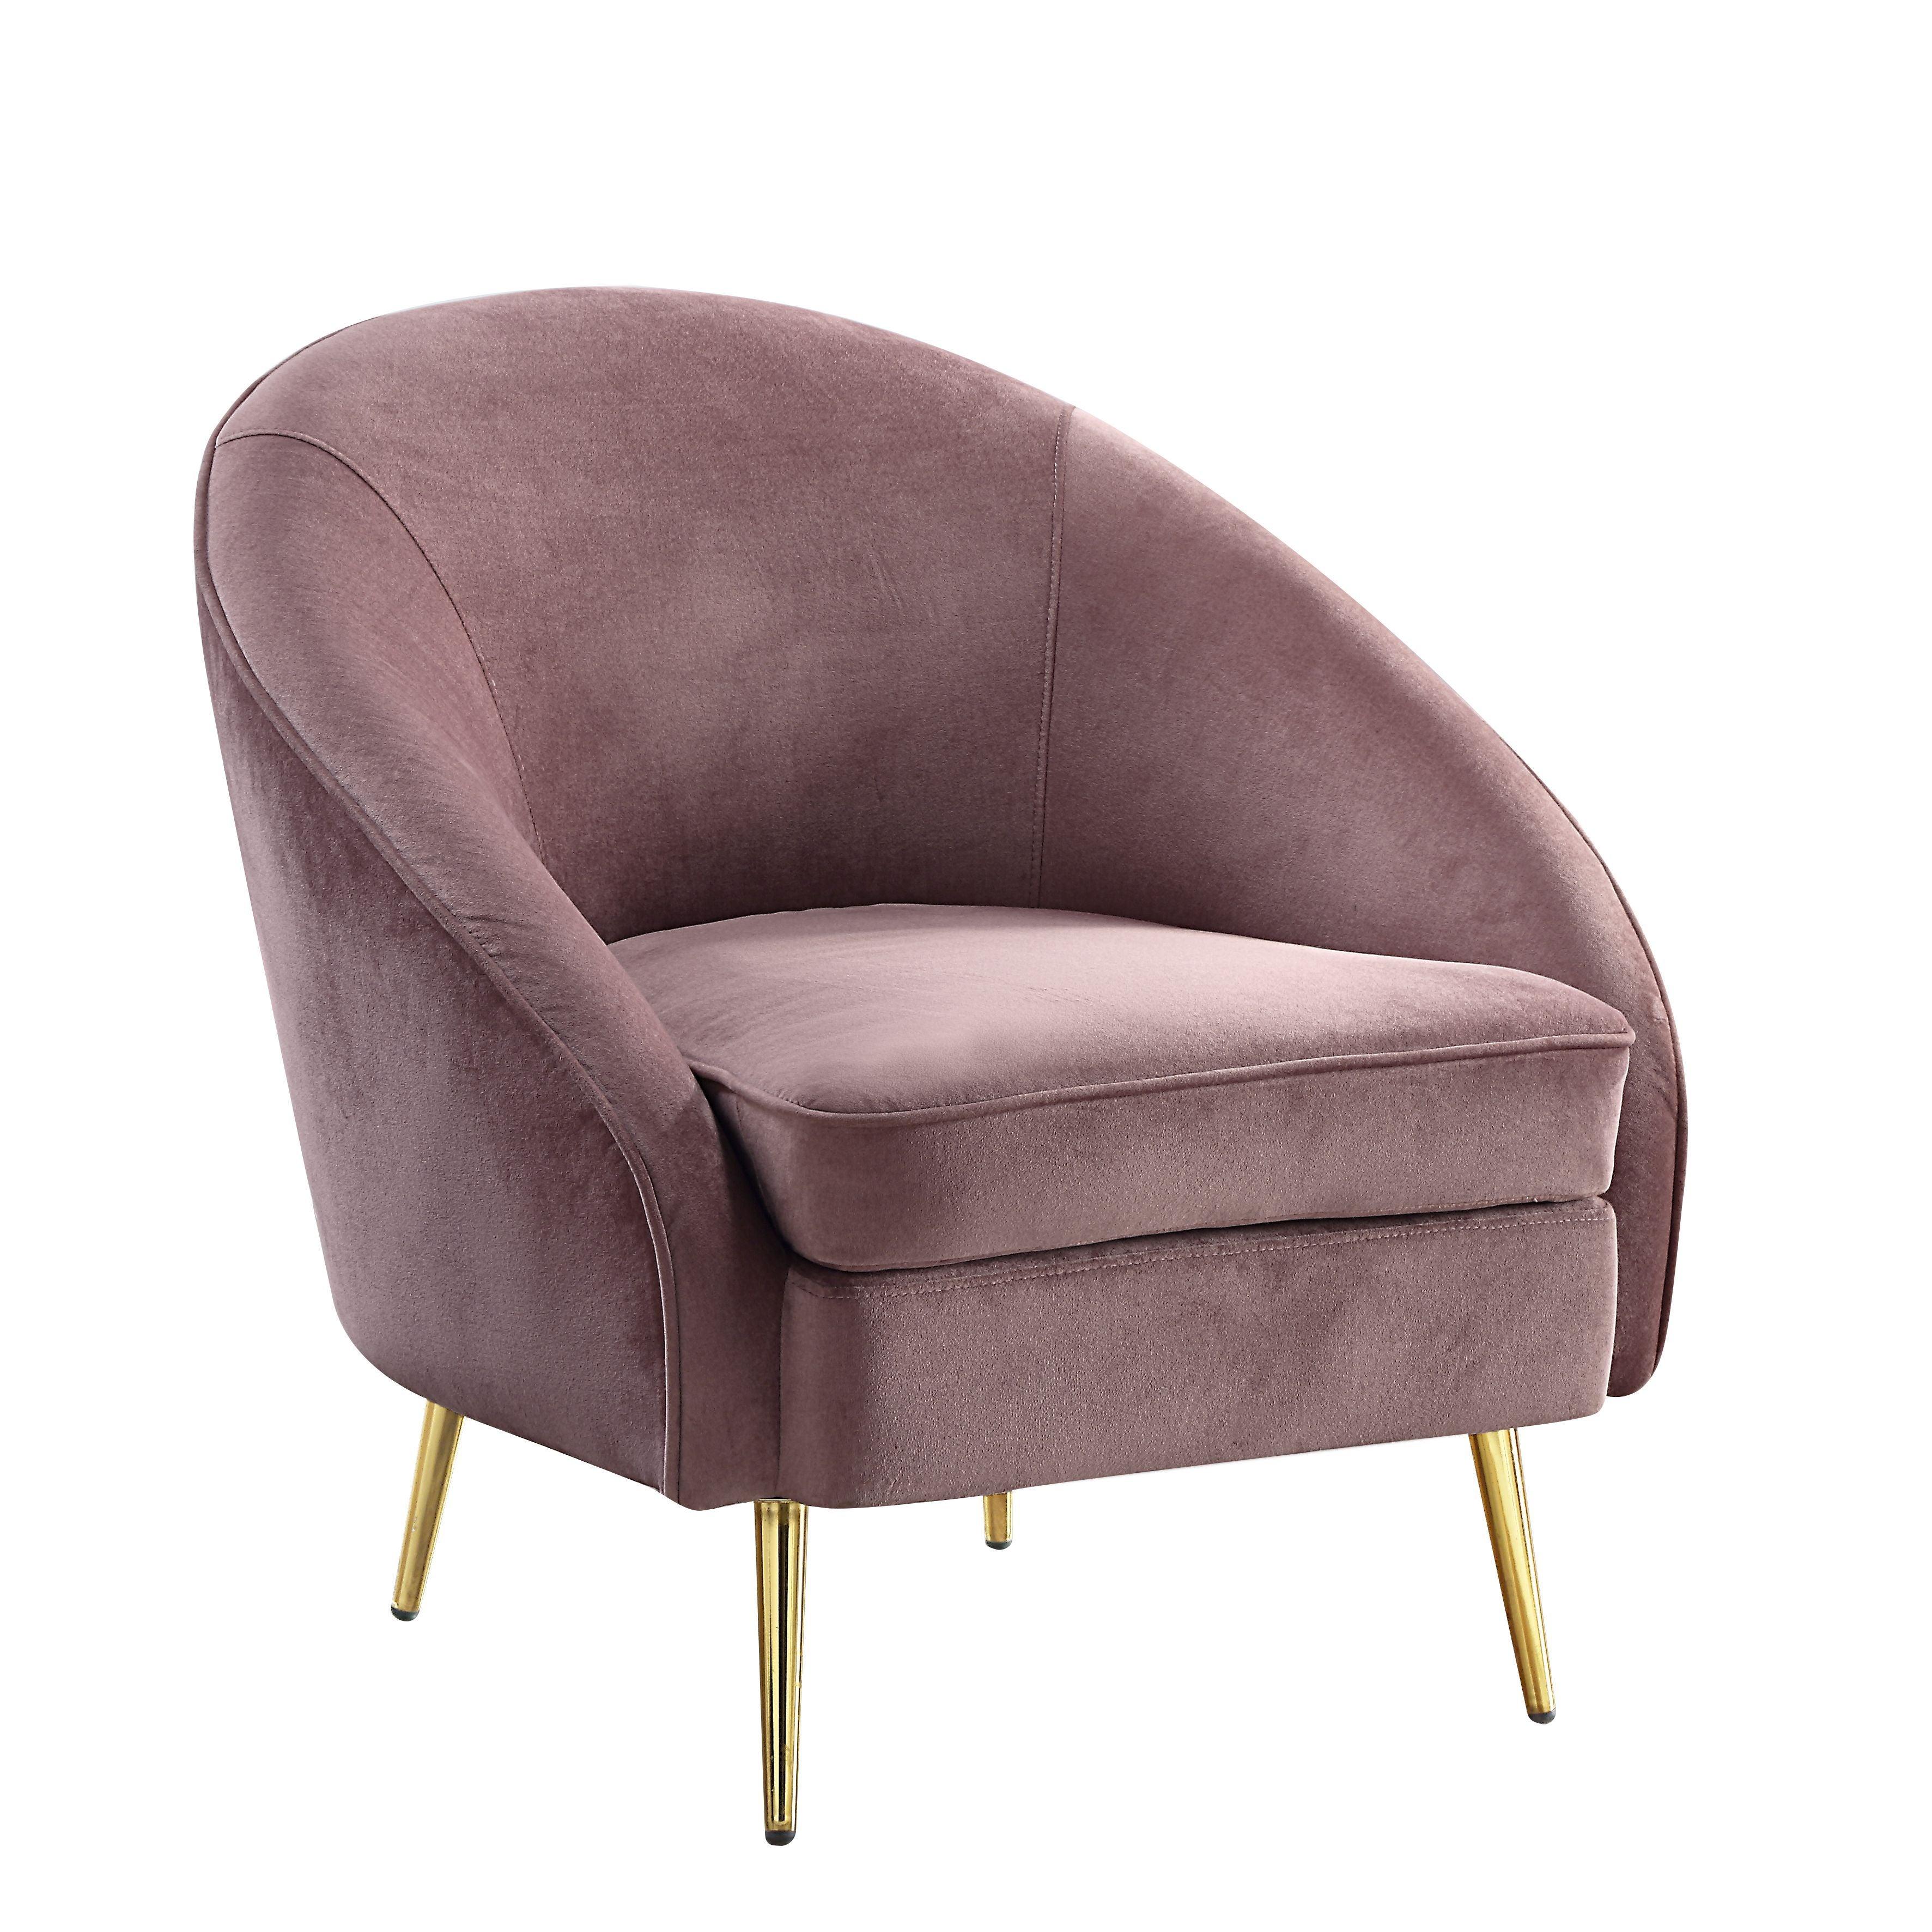 ACME - Abey - Chair - Pink Velvet - 5th Avenue Furniture